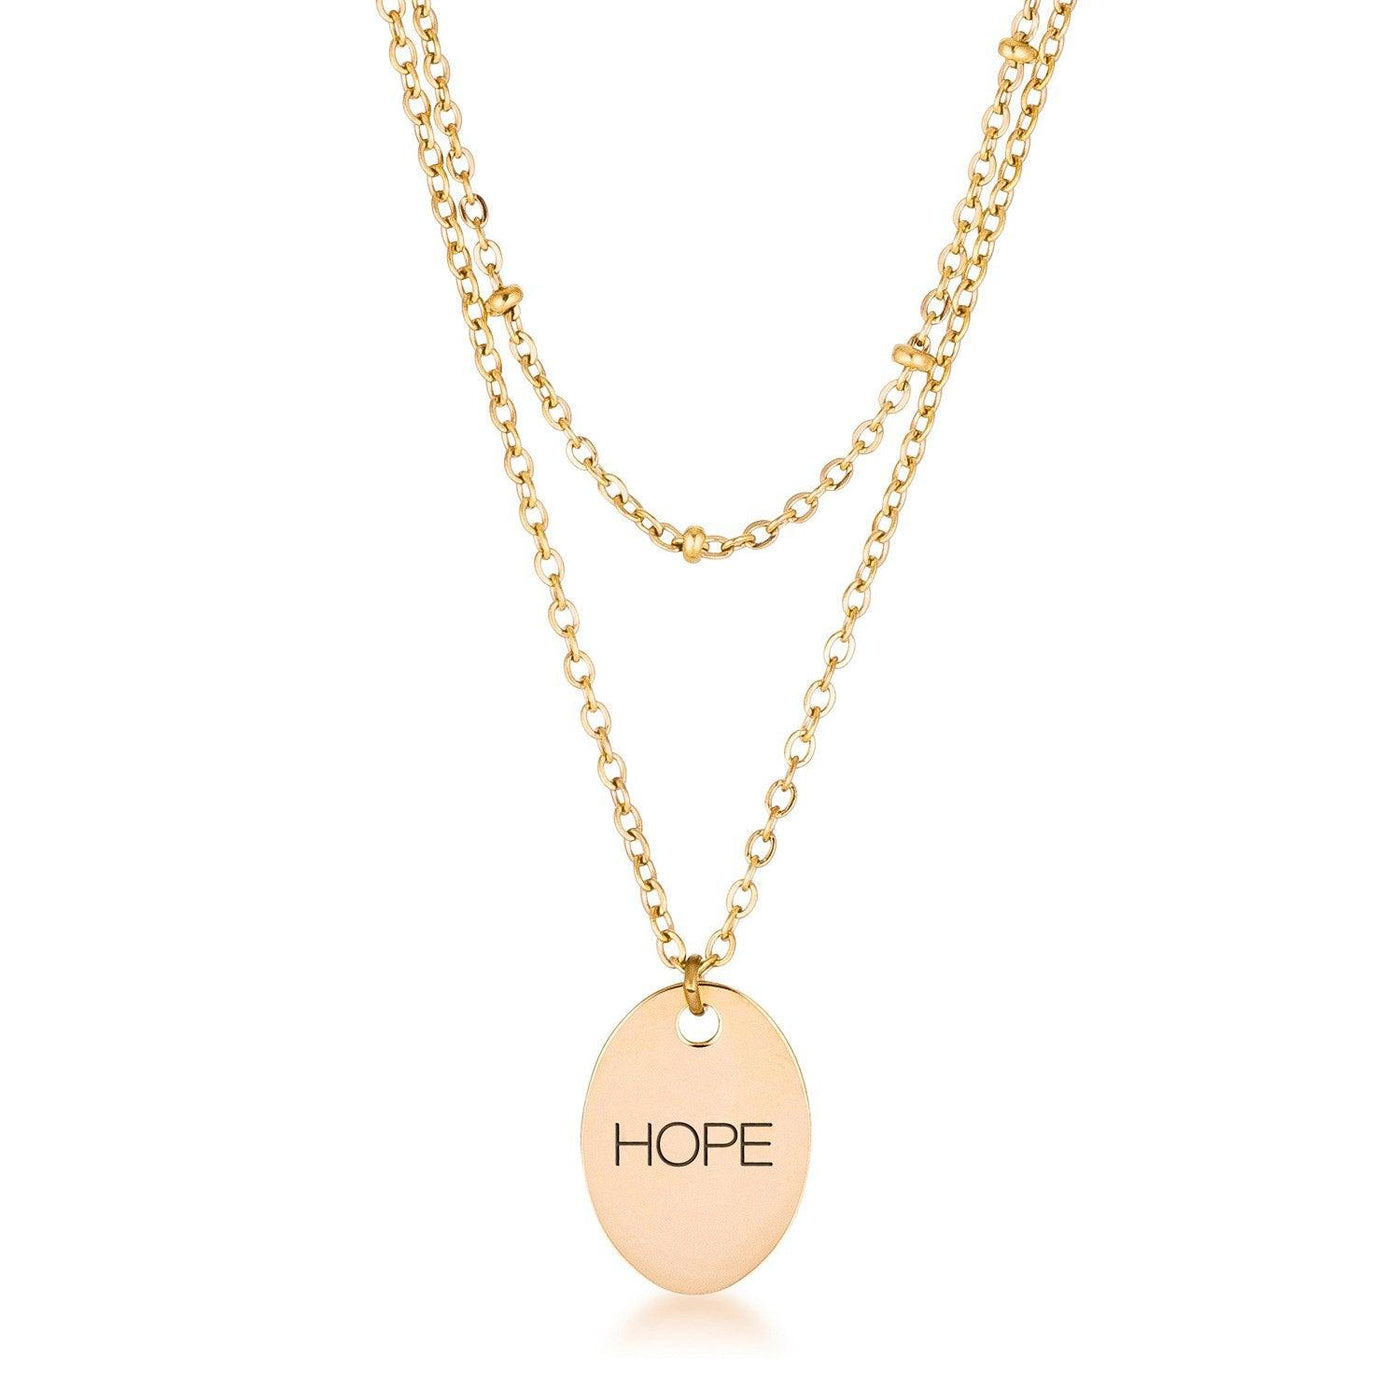 This classy necklace features a simple oval pendant inscribed with HOPE hanging from a cable chain. An inner saturn chain adds sophistication to - AMIClubwear